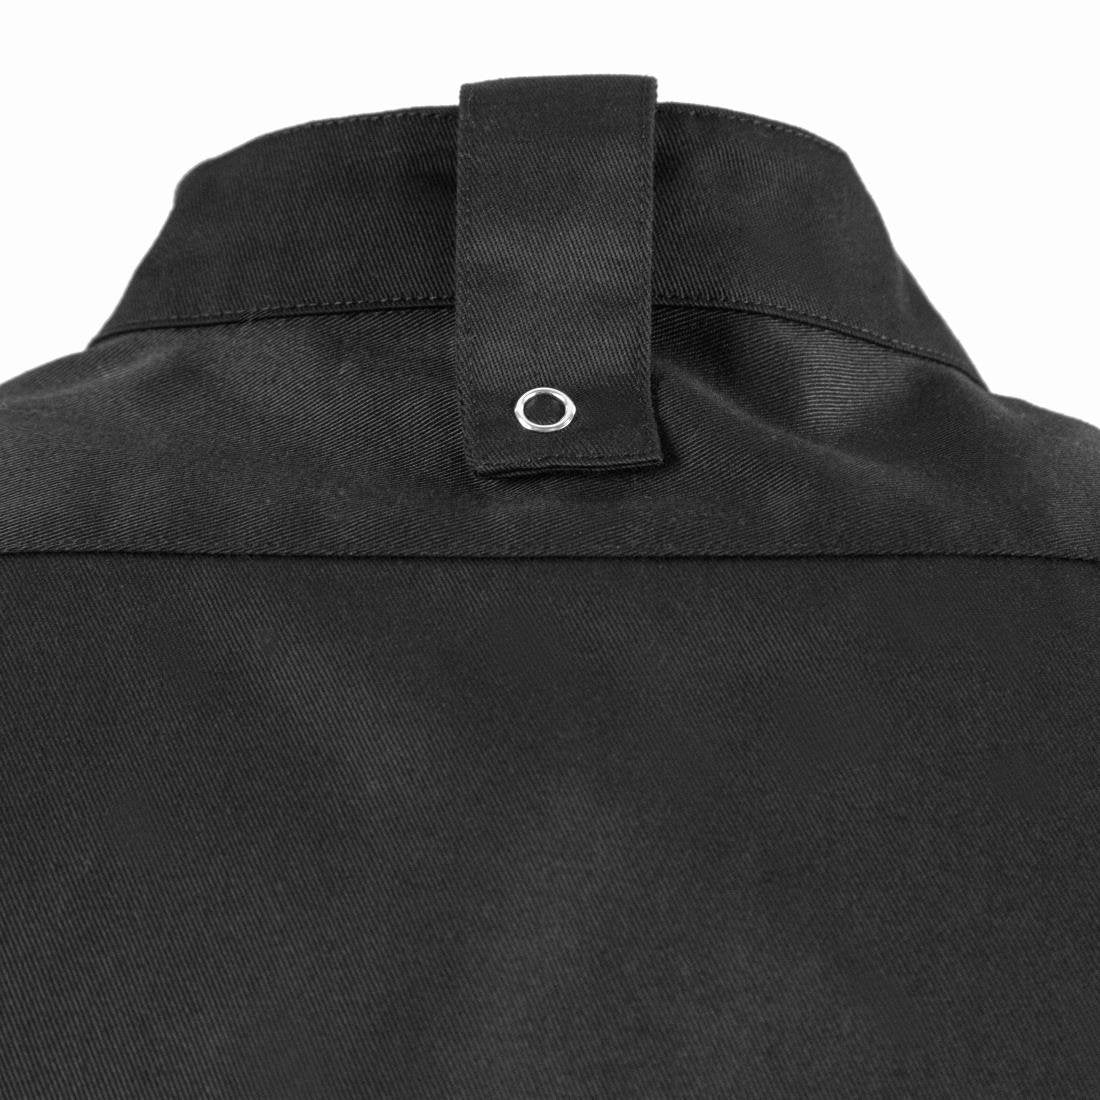 BB711-S Southside Band Collar Chefs Jacket Black Size S JD Catering Equipment Solutions Ltd